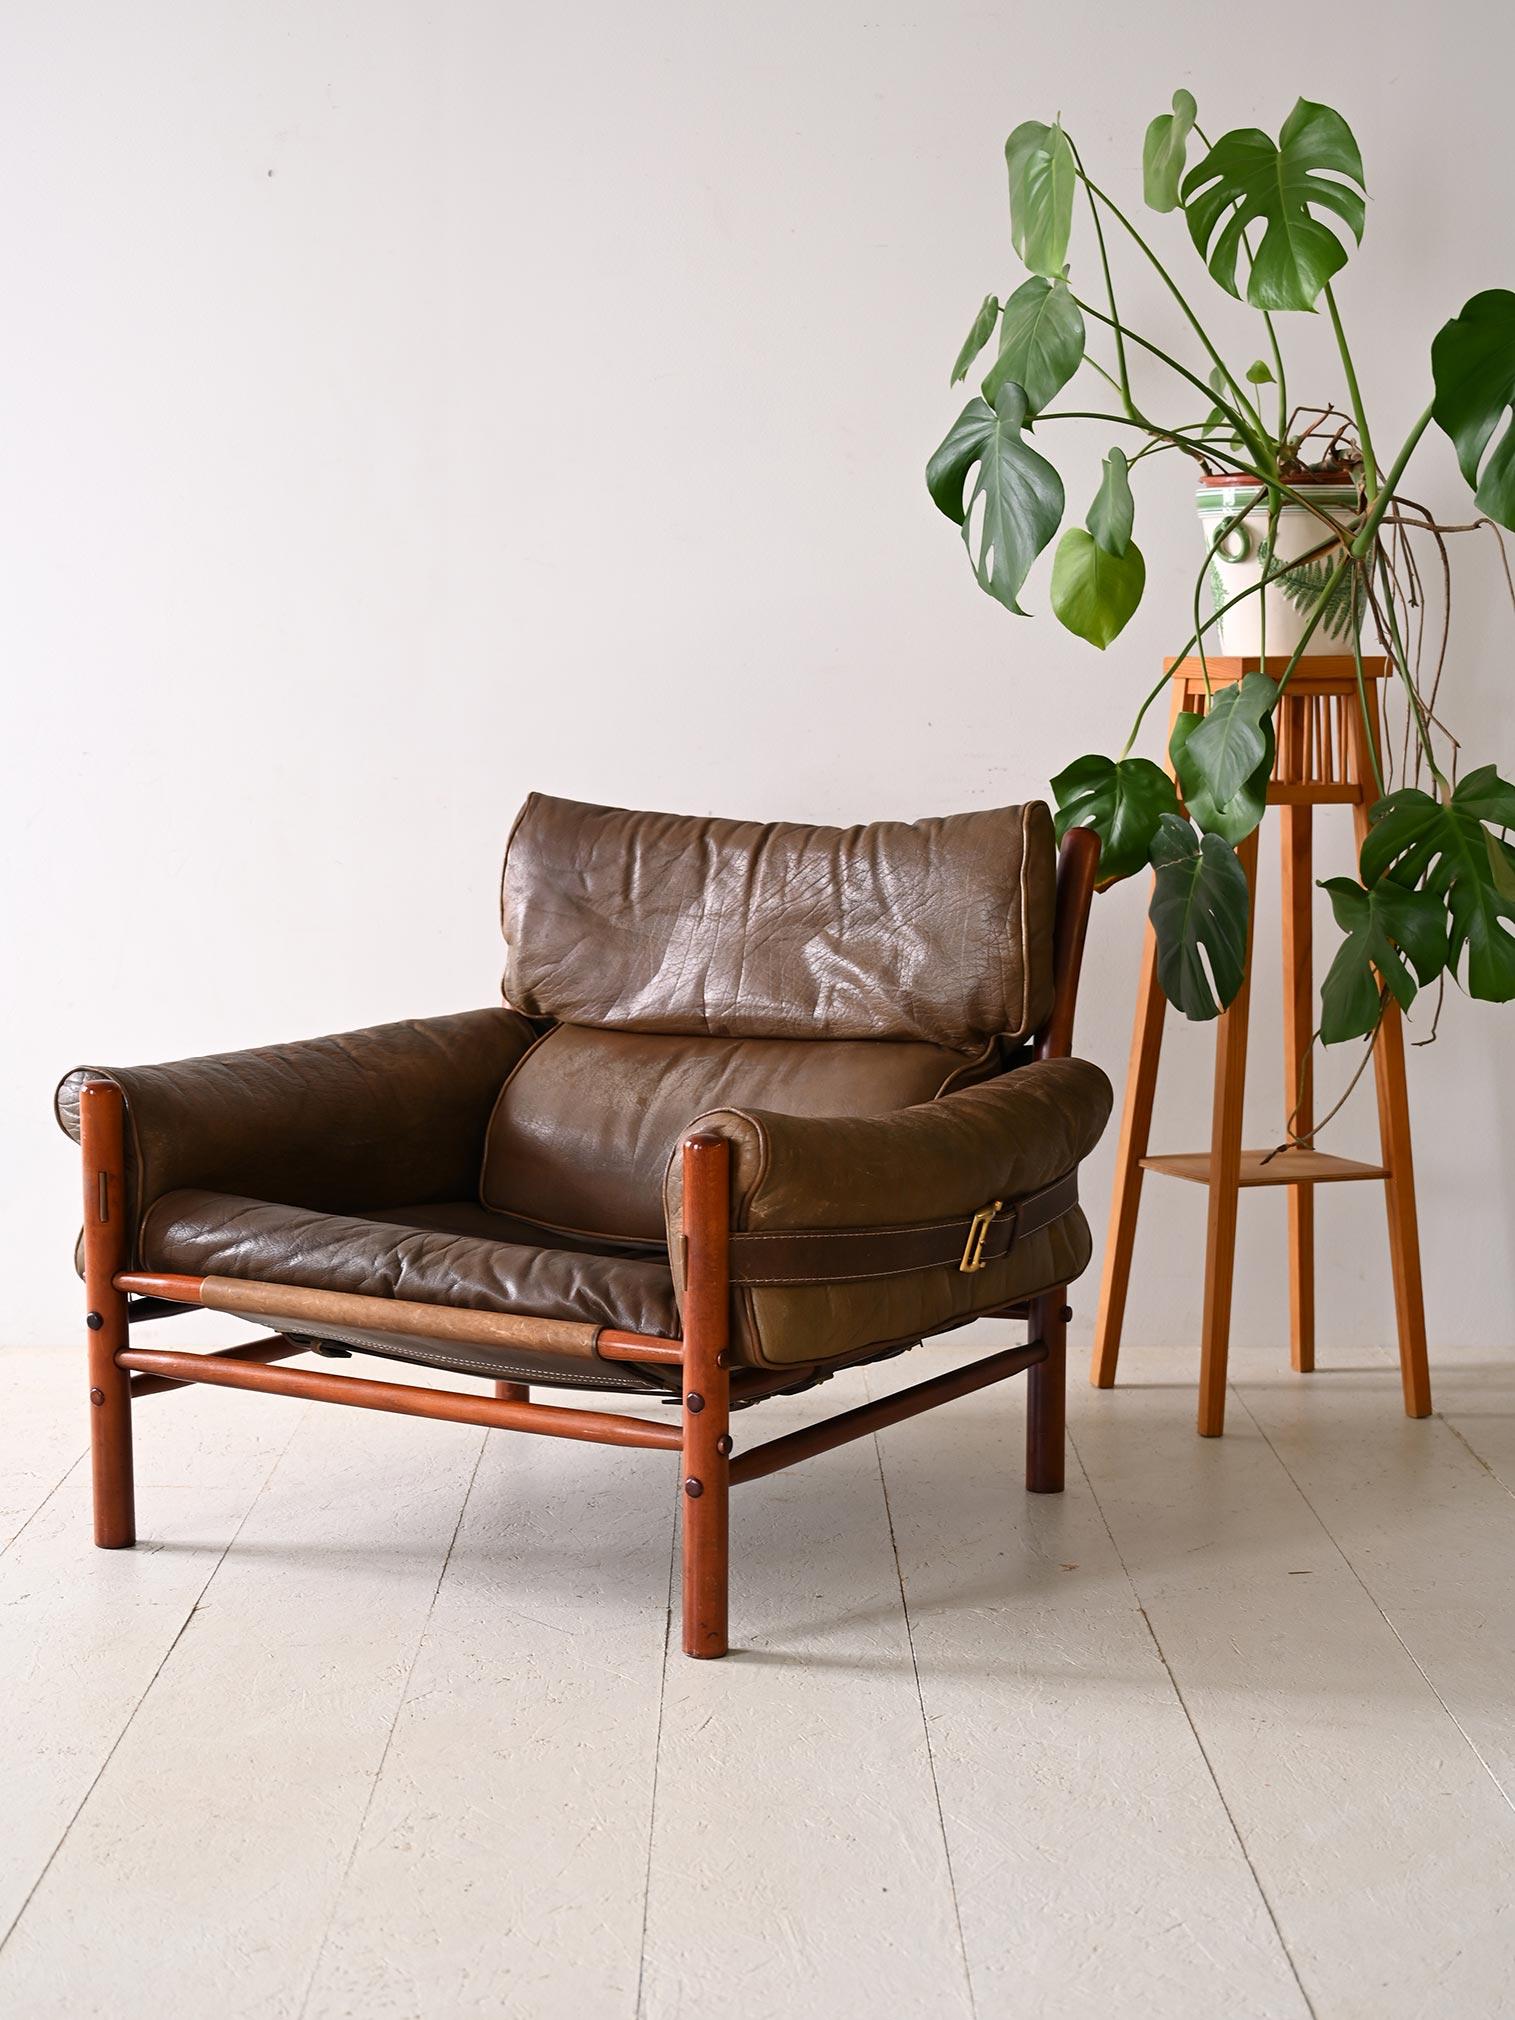 Scandinavian armchair with leather seat. This design masterpiece combines the warm beauty of wood and the sophistication of leather to create a piece that stands out for its distinctive style and quality craftsmanship. The wooden frame provides a